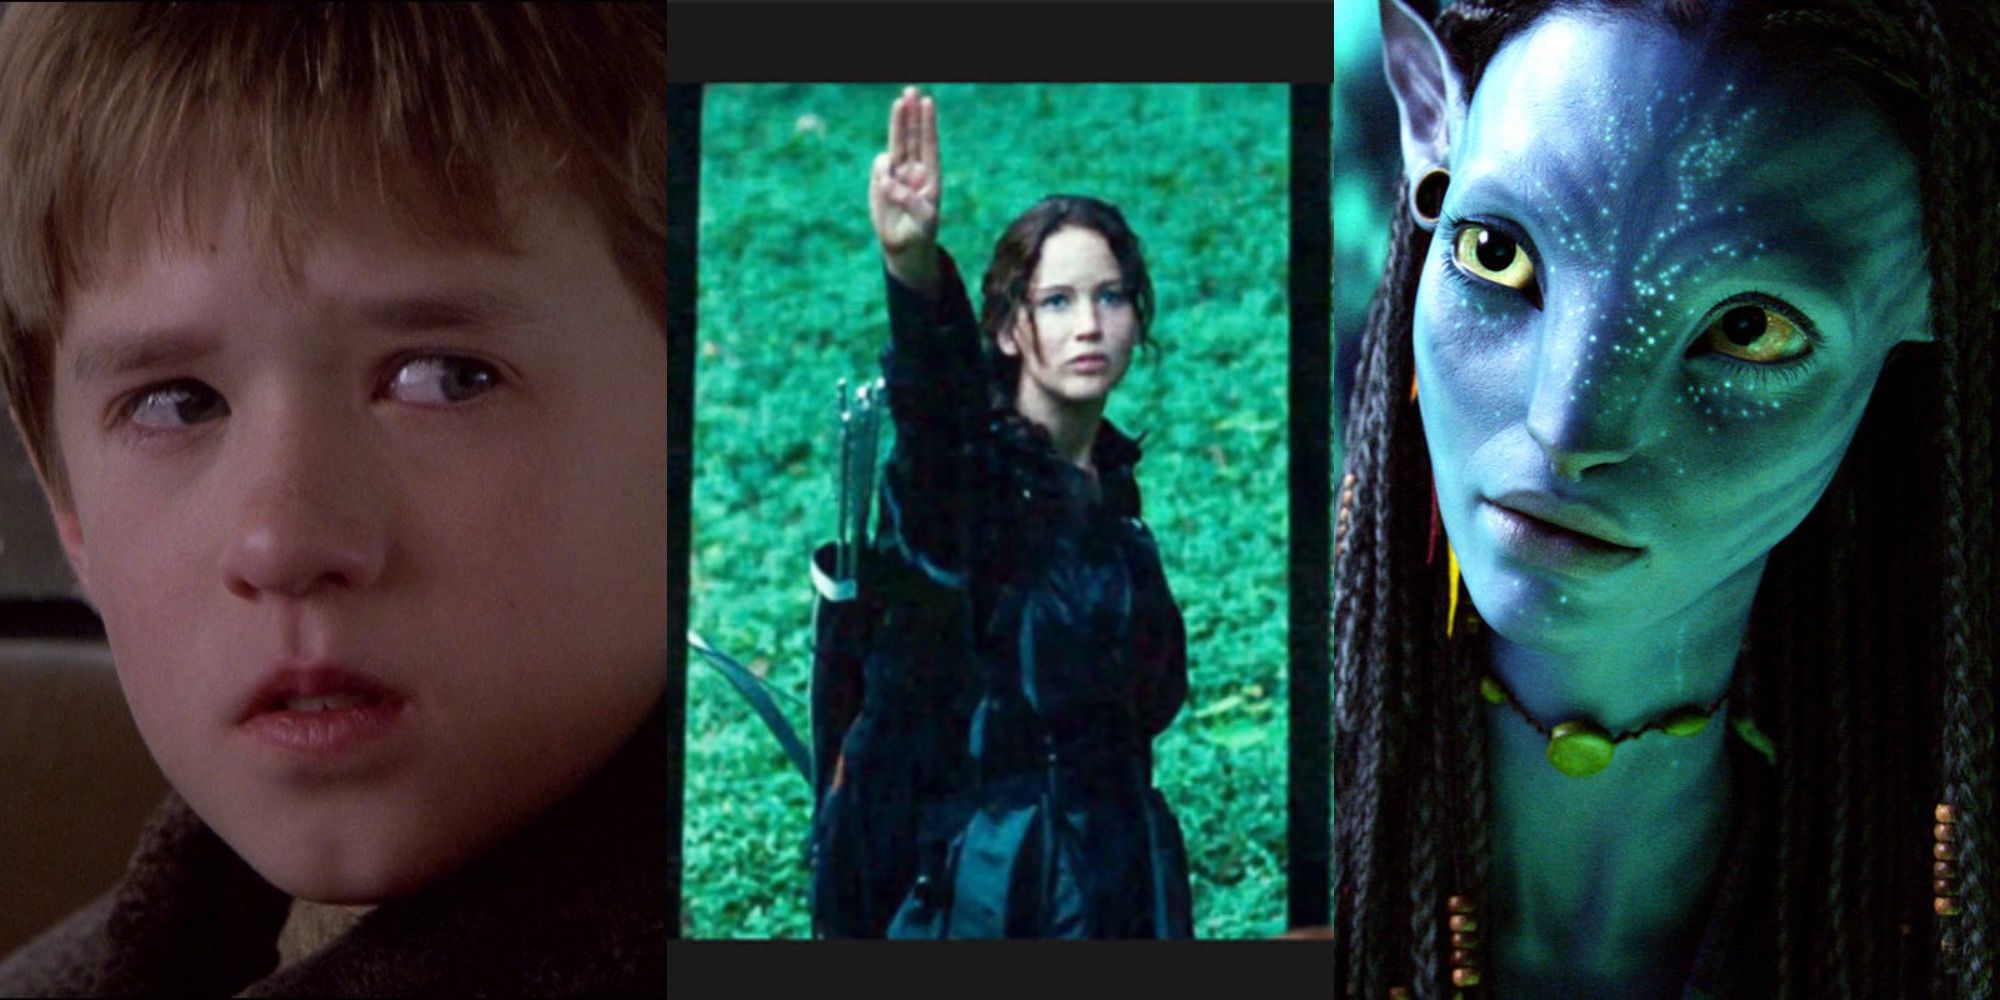 The Sixth Sense, The Hunger Games and Avatar